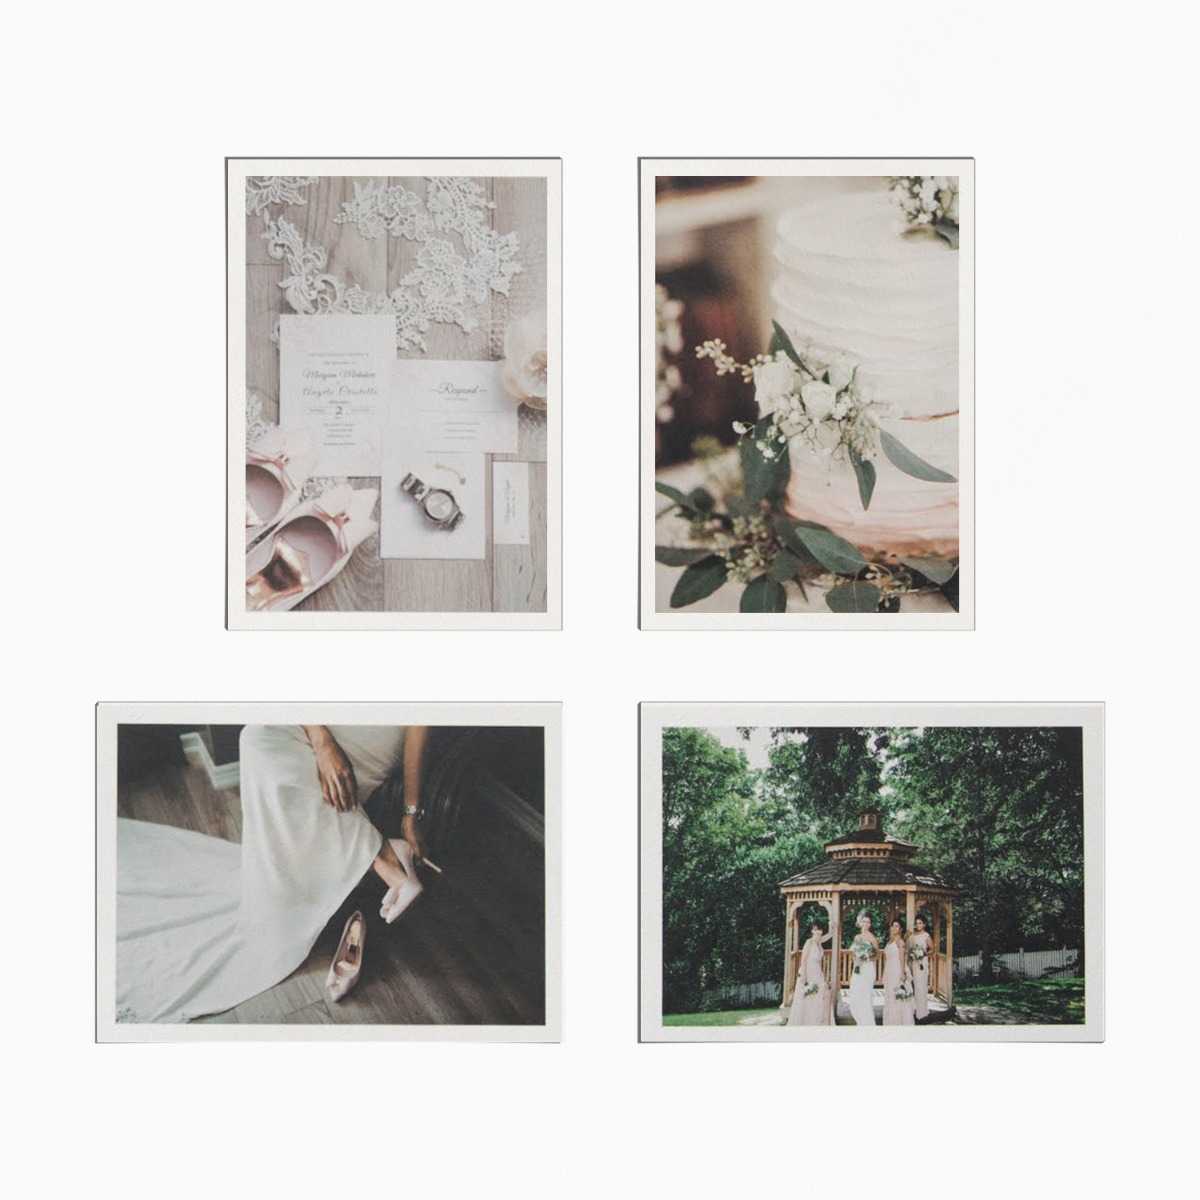 a photo card set. card 1 has an images of wedding invitation, wedding shoes, a watch and a veil. card 2 has an image of an ombre wedding cake. card 3 has an image of a bride putting on her shoes. card 4 is a portrait image of the bride and her bridemaids 